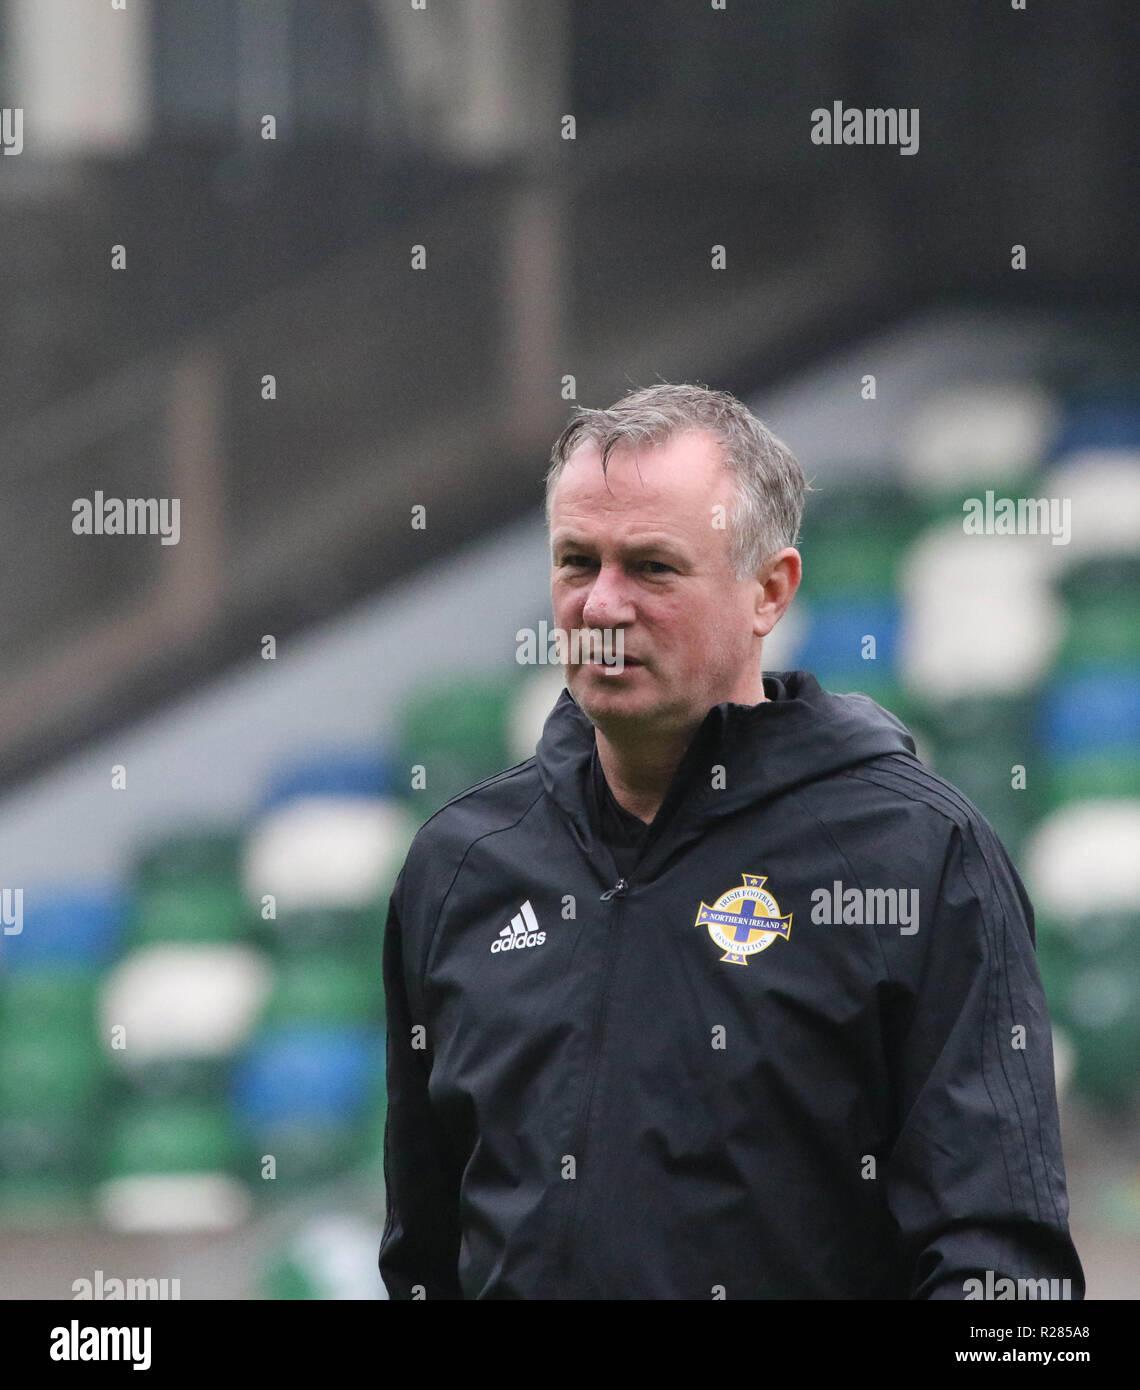 Windsor Park, Belfast, Northern Ireland.17 November 2018. Northern Ireland training in Belfast this morning ahead of their UEFA Nations League game against Austria tomorrow night in the stadium. Northern ireland manager Michael O'Neill at training. Credit: David Hunter/Alamy Live News. Stock Photo